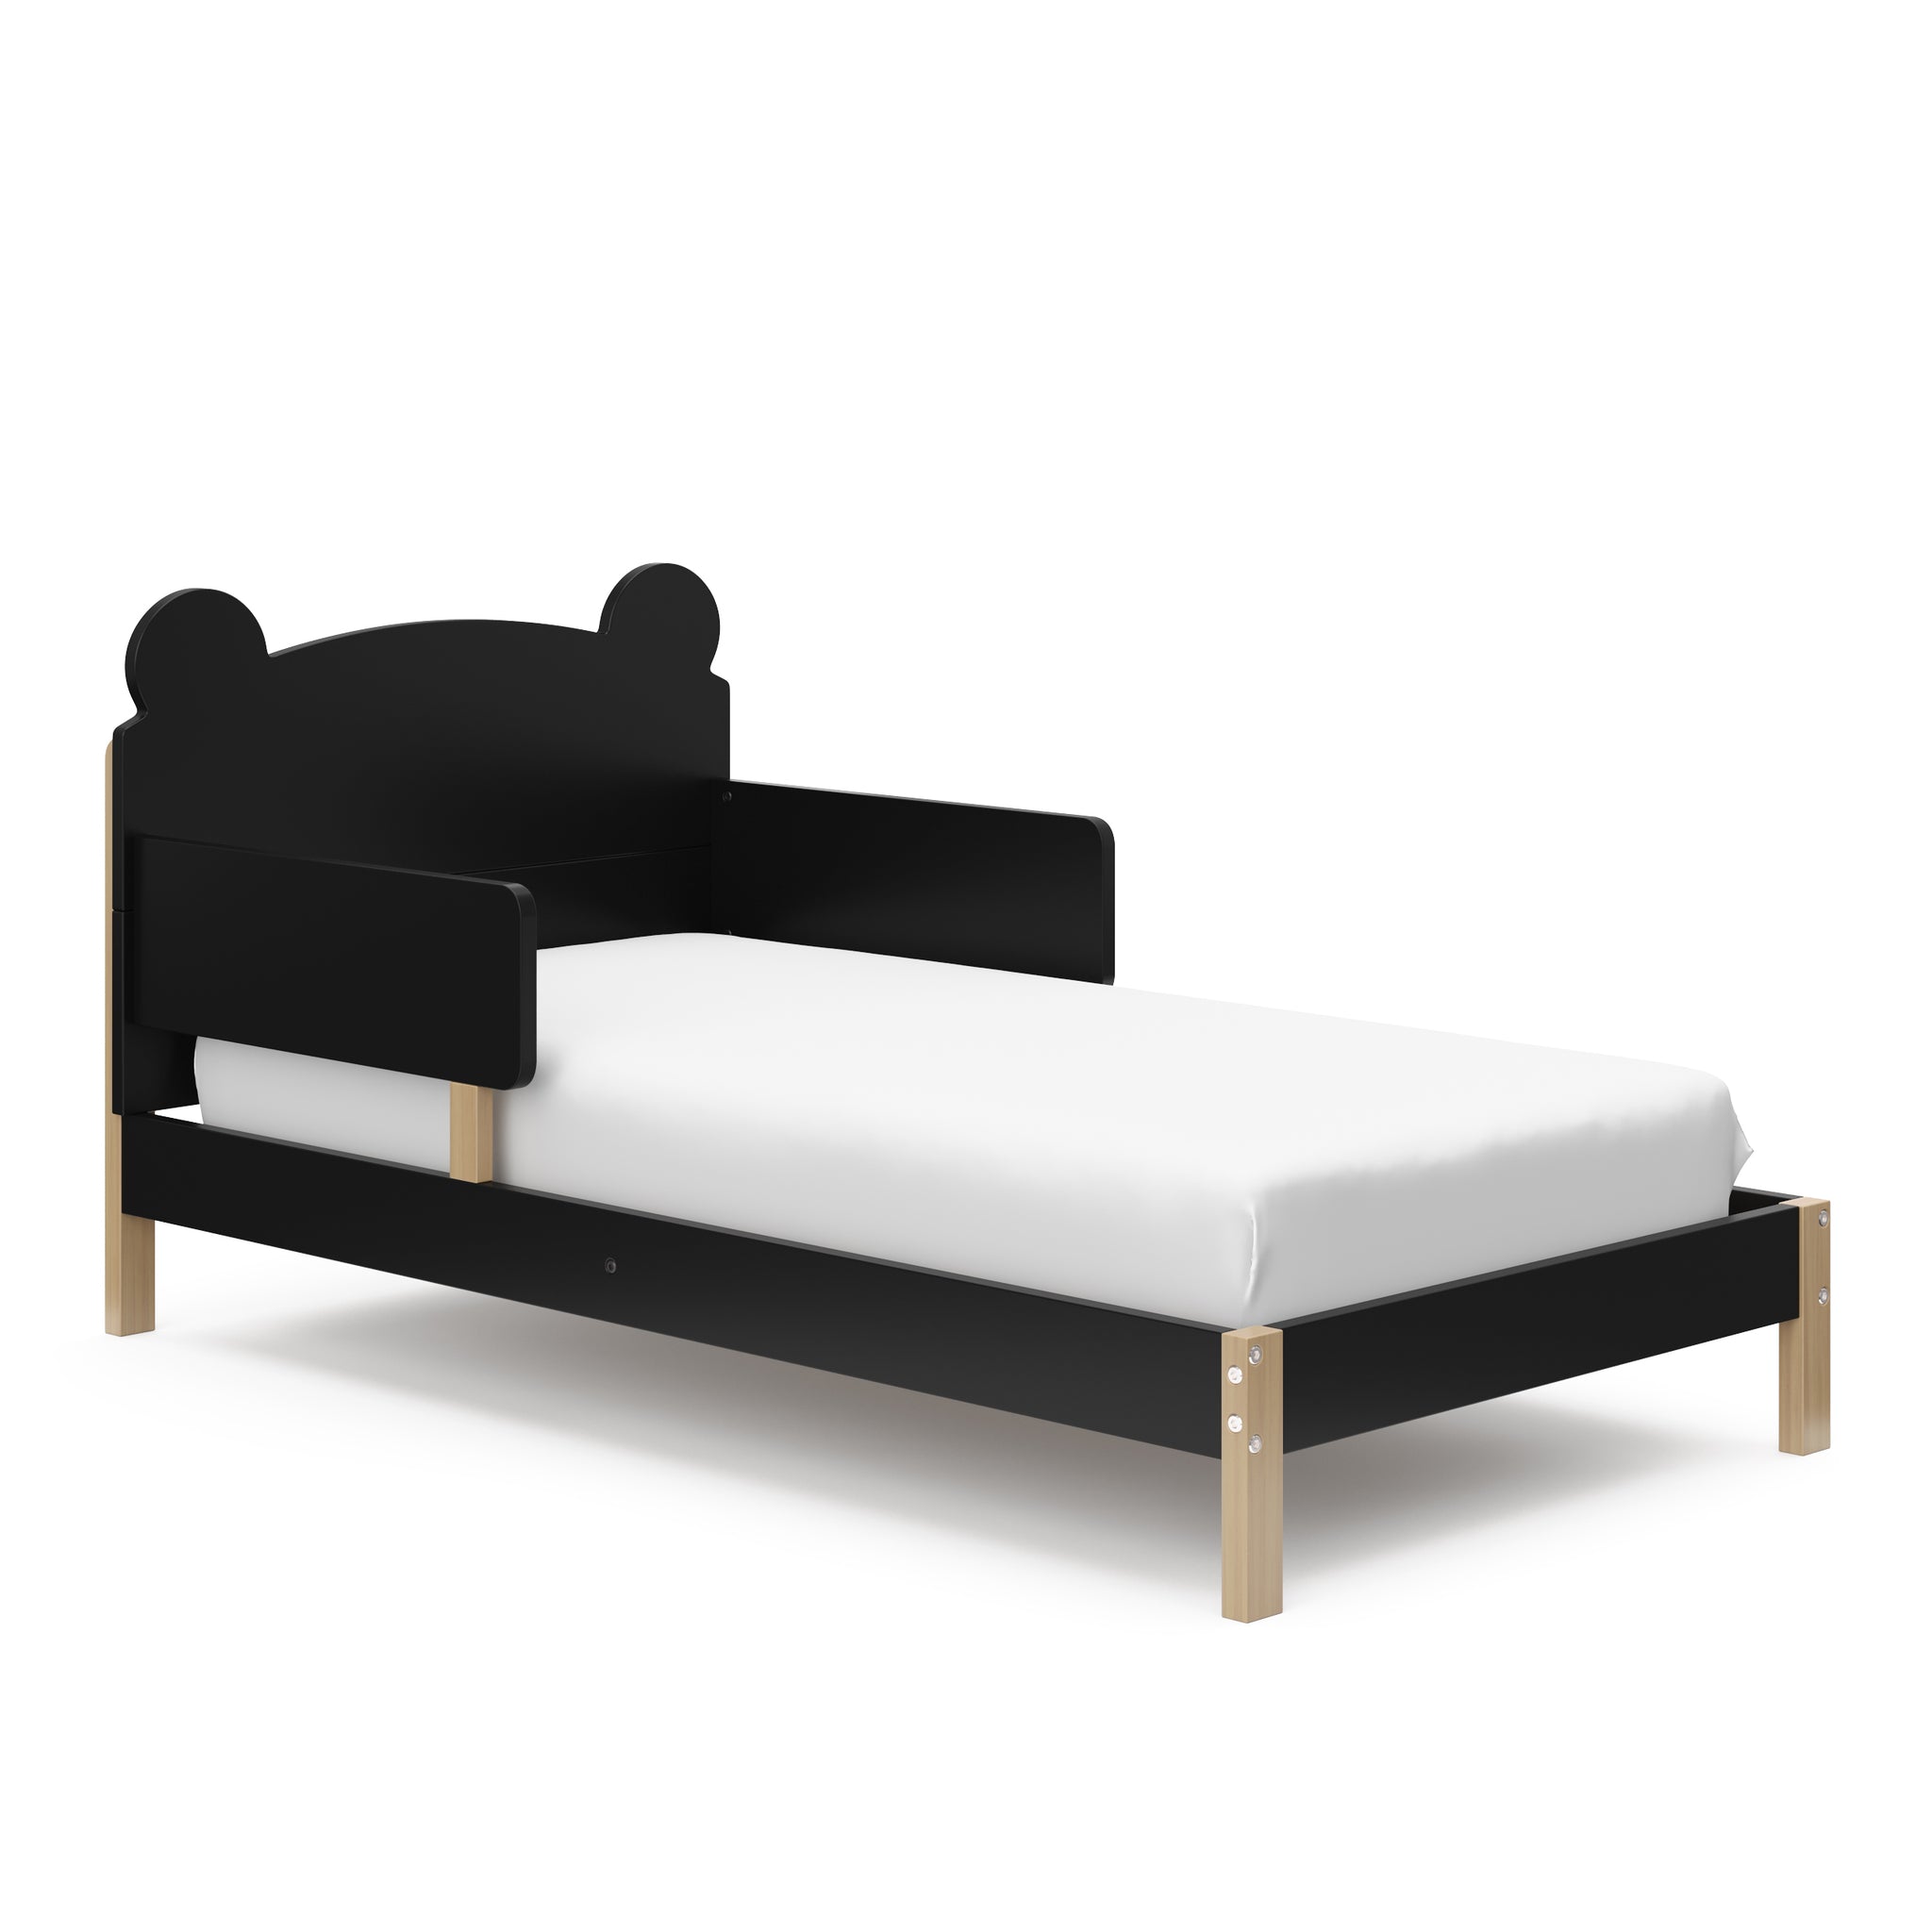 Angled view of a black-colored toddler bed